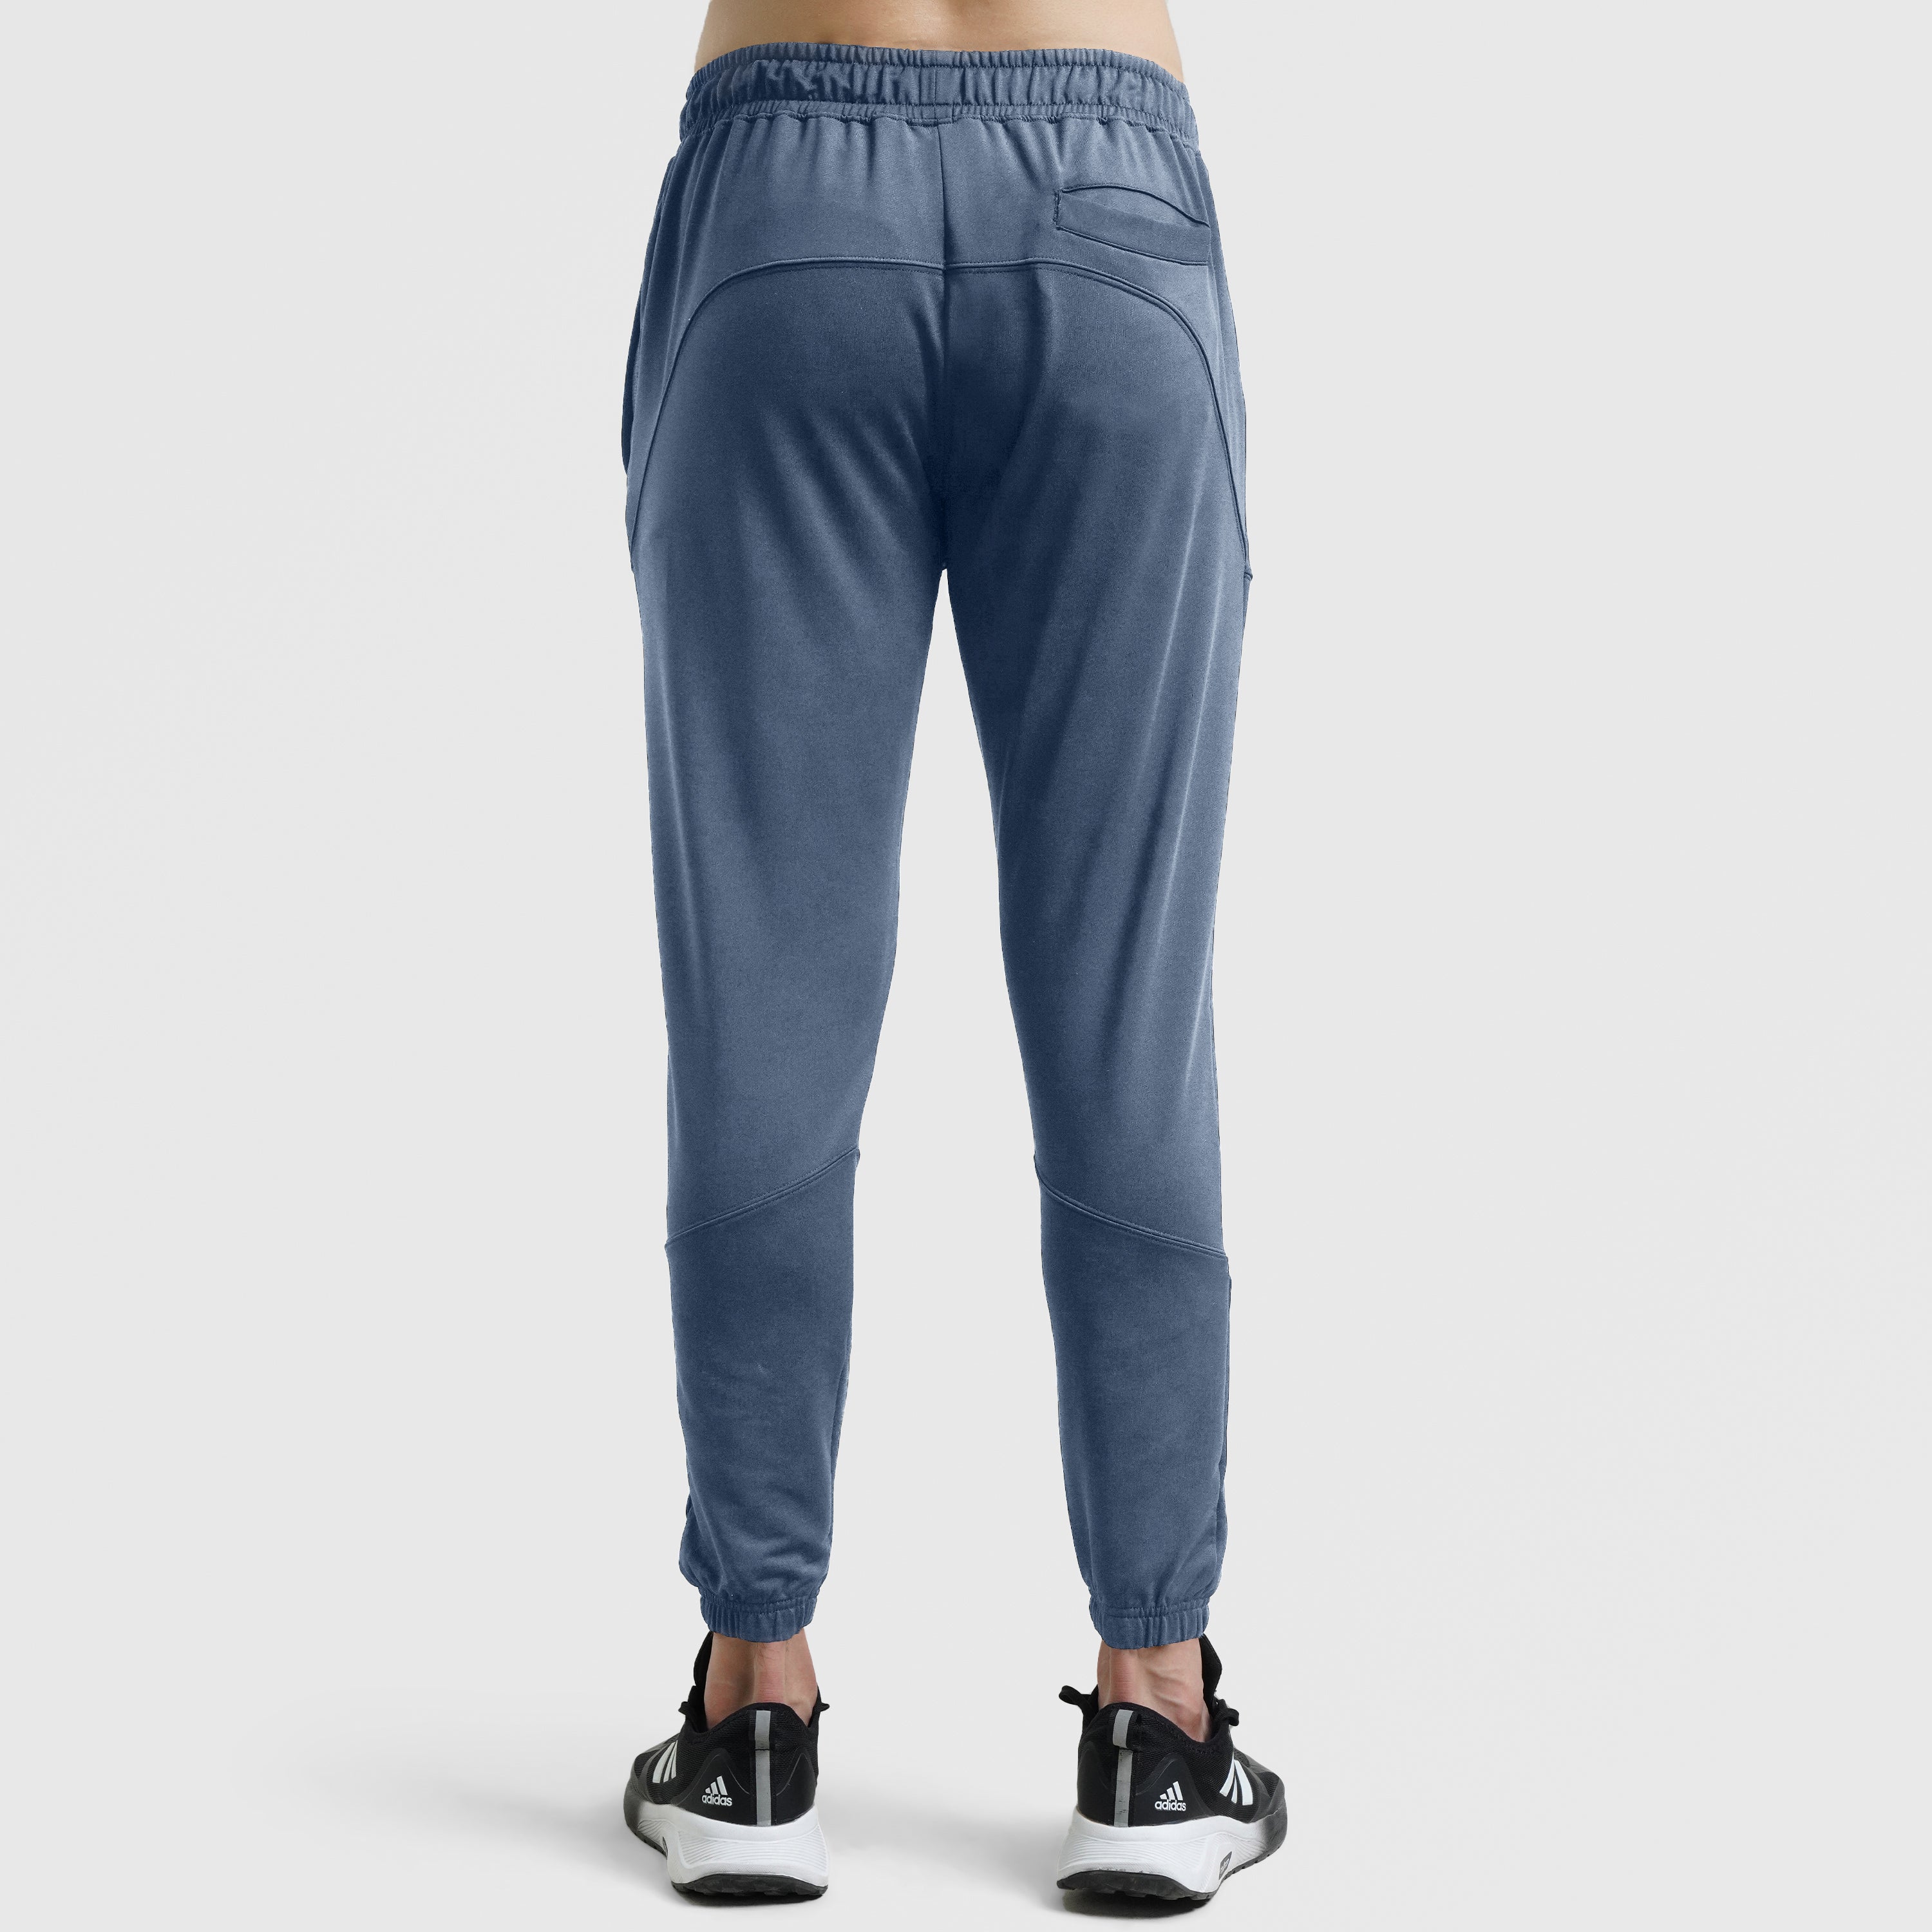 Rown Trousers (Blue)